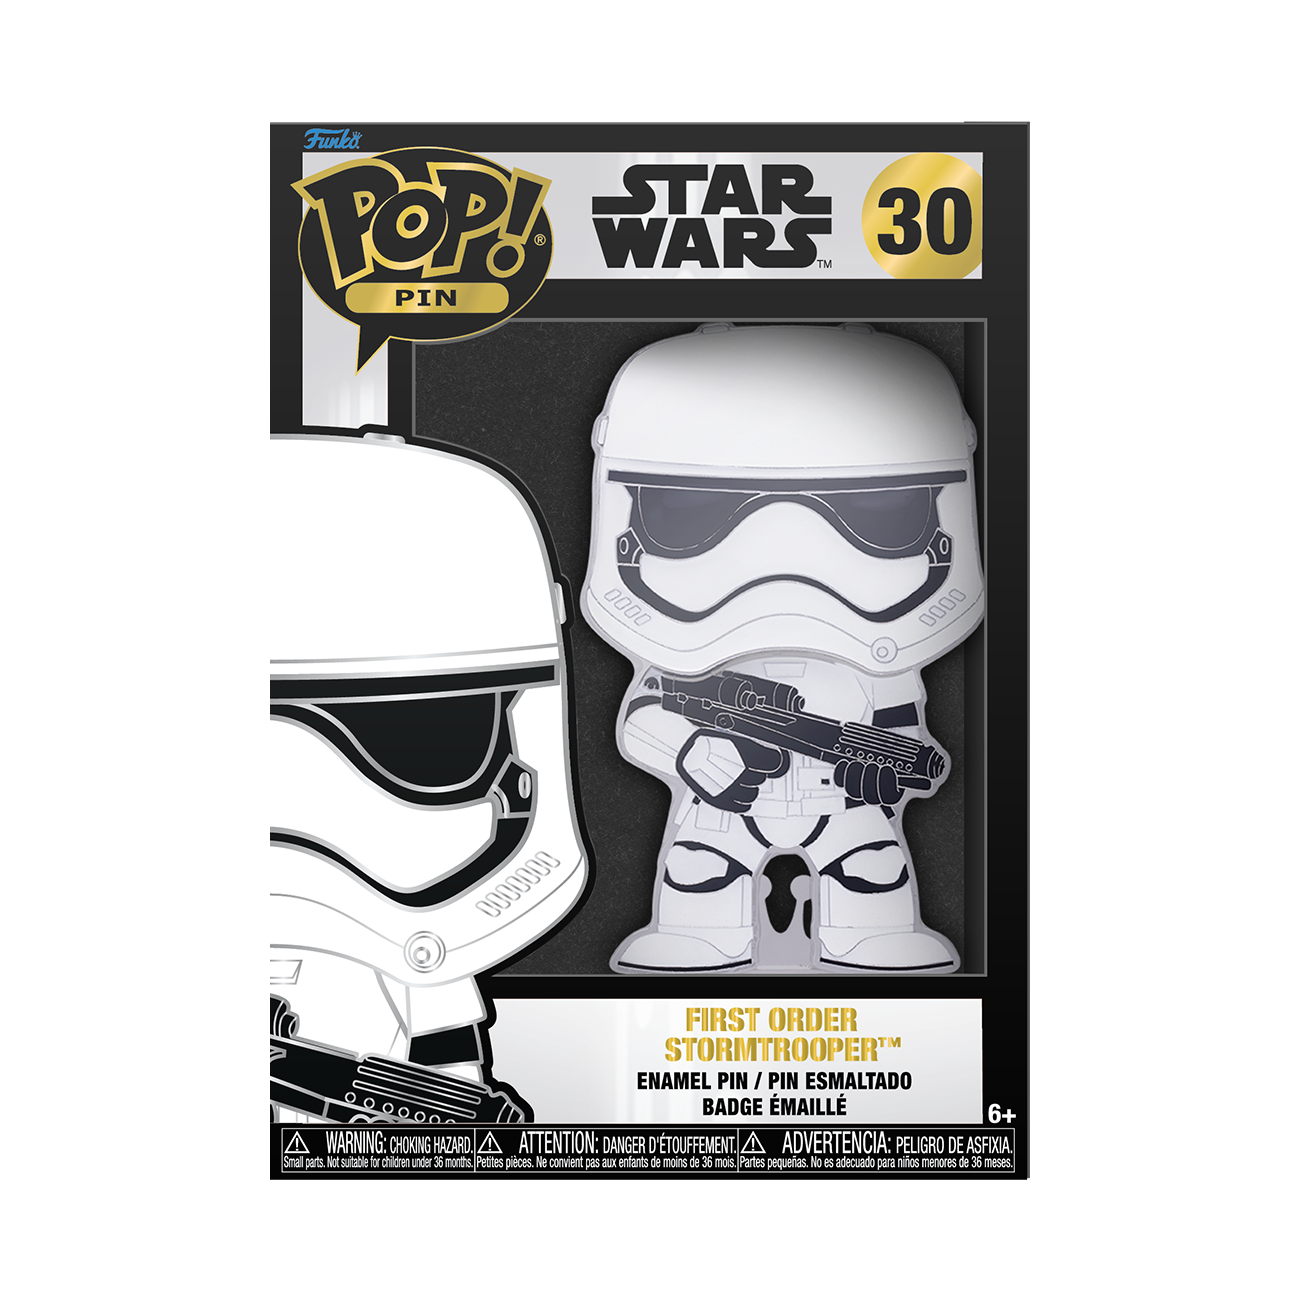 Photos - Action Figures / Transformers Funko POP! PIN Storm Trooper First Order Pop Pin - Star Wars 